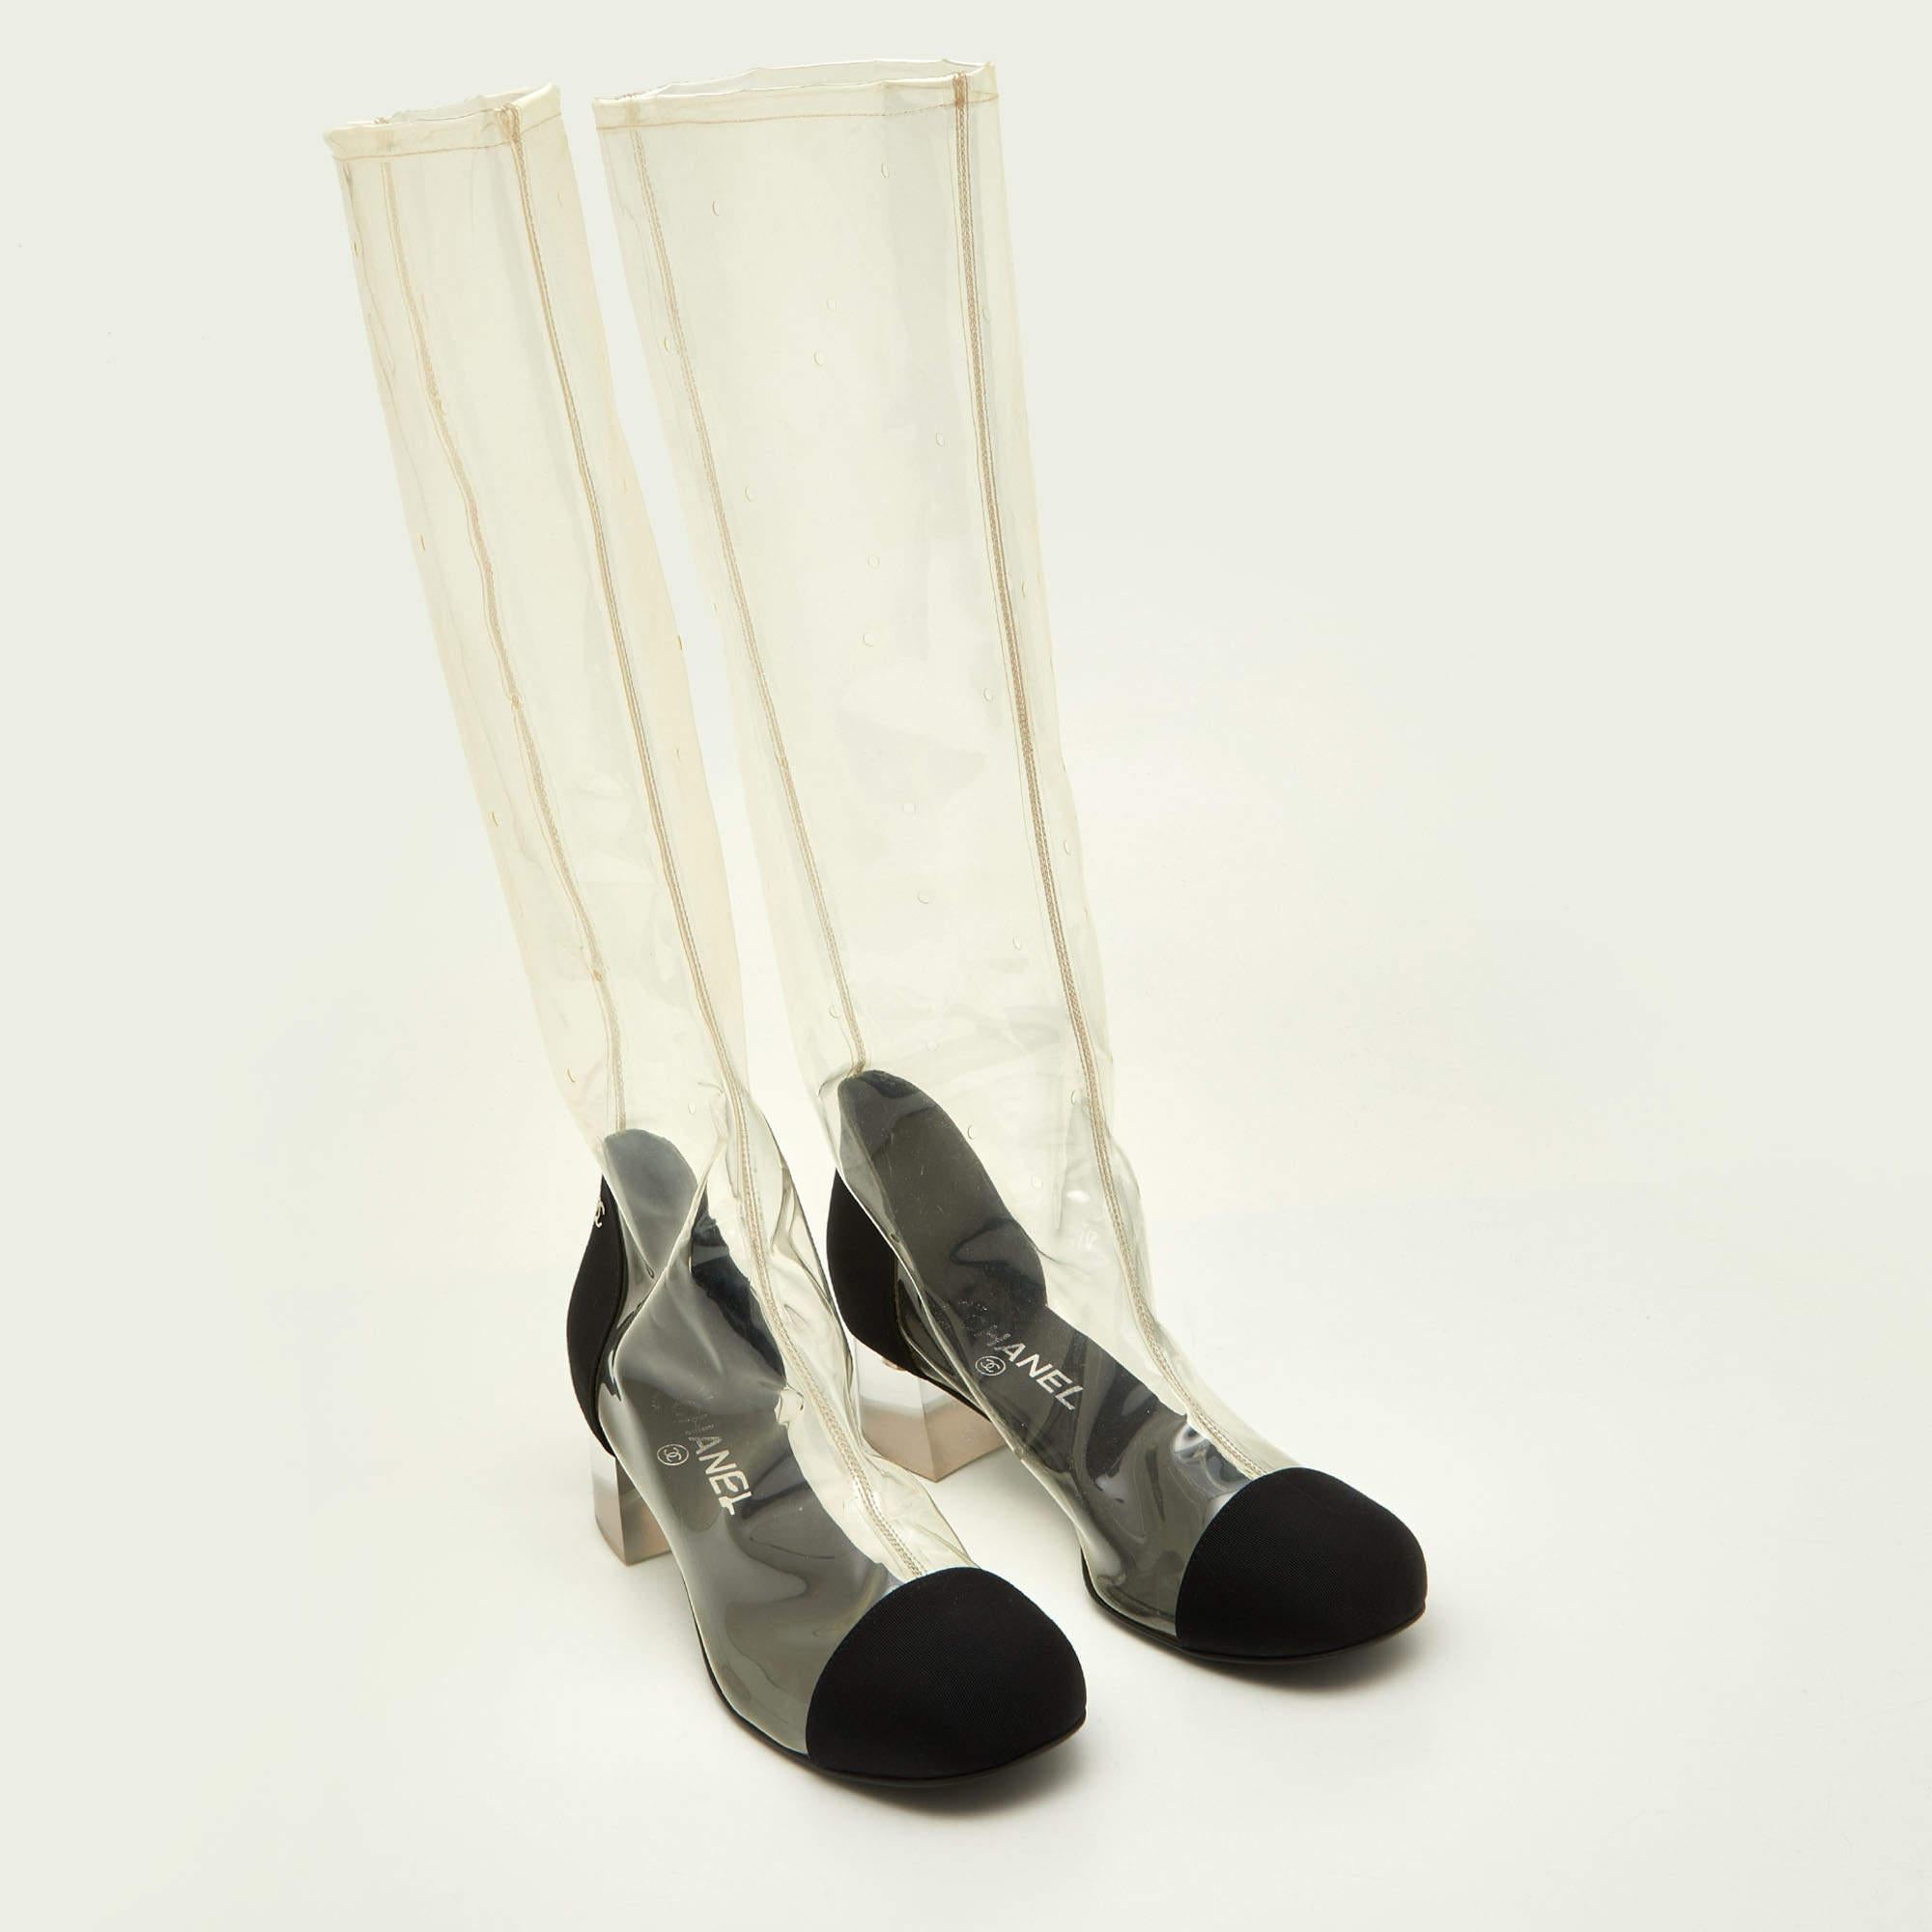 Chanel Transparent/Black PVC and Grosgrain Knee High Boots Size 38.5 In New Condition For Sale In Dubai, Al Qouz 2